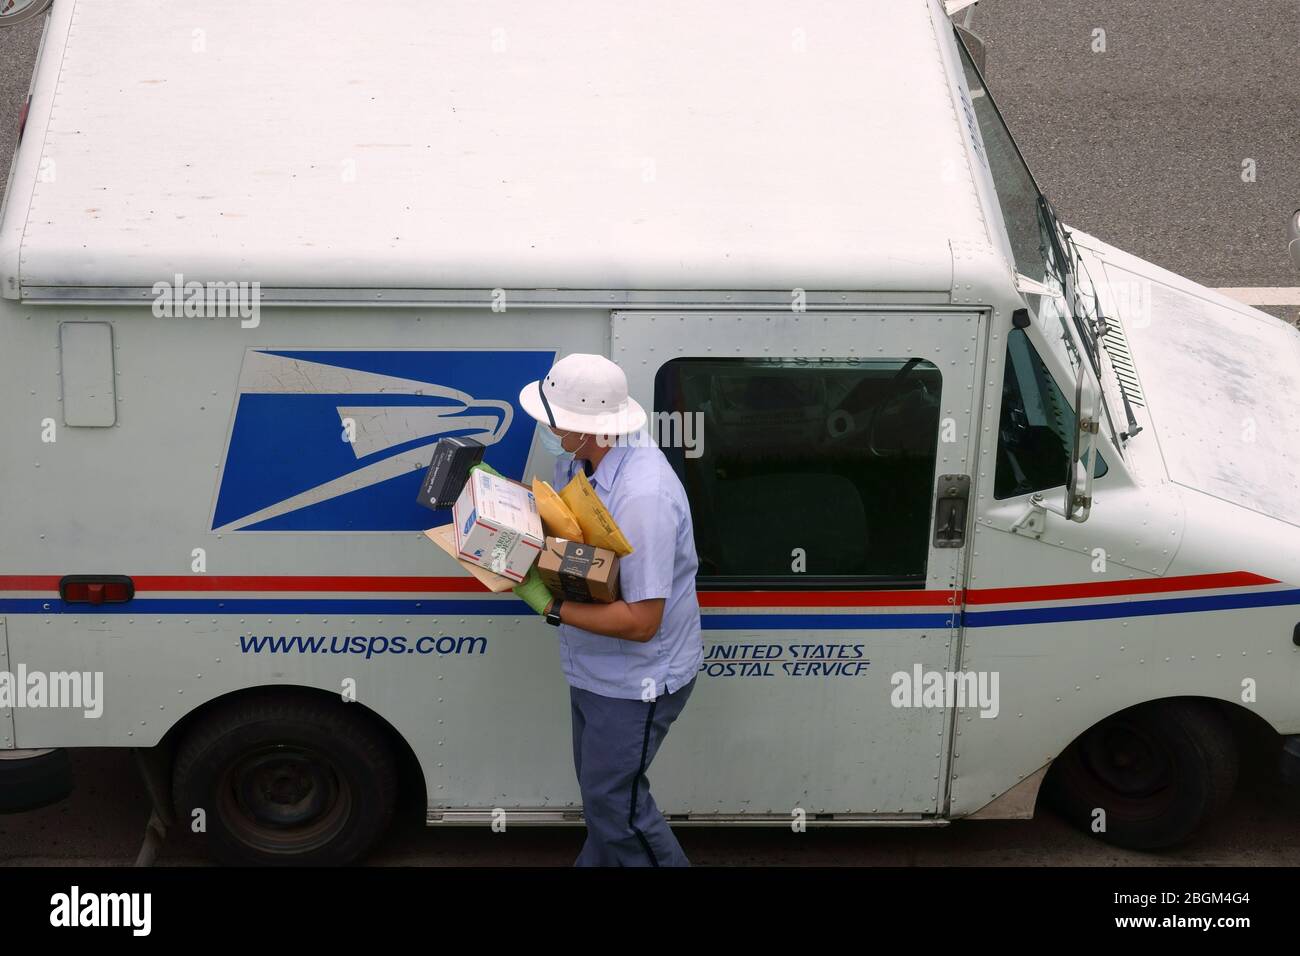 Los Angeles, CA / USA - April 20, 2020: A mail carrier for the United States Postal Service USPS wears a mask and gloves during the COVID-19 pandemic. Stock Photo